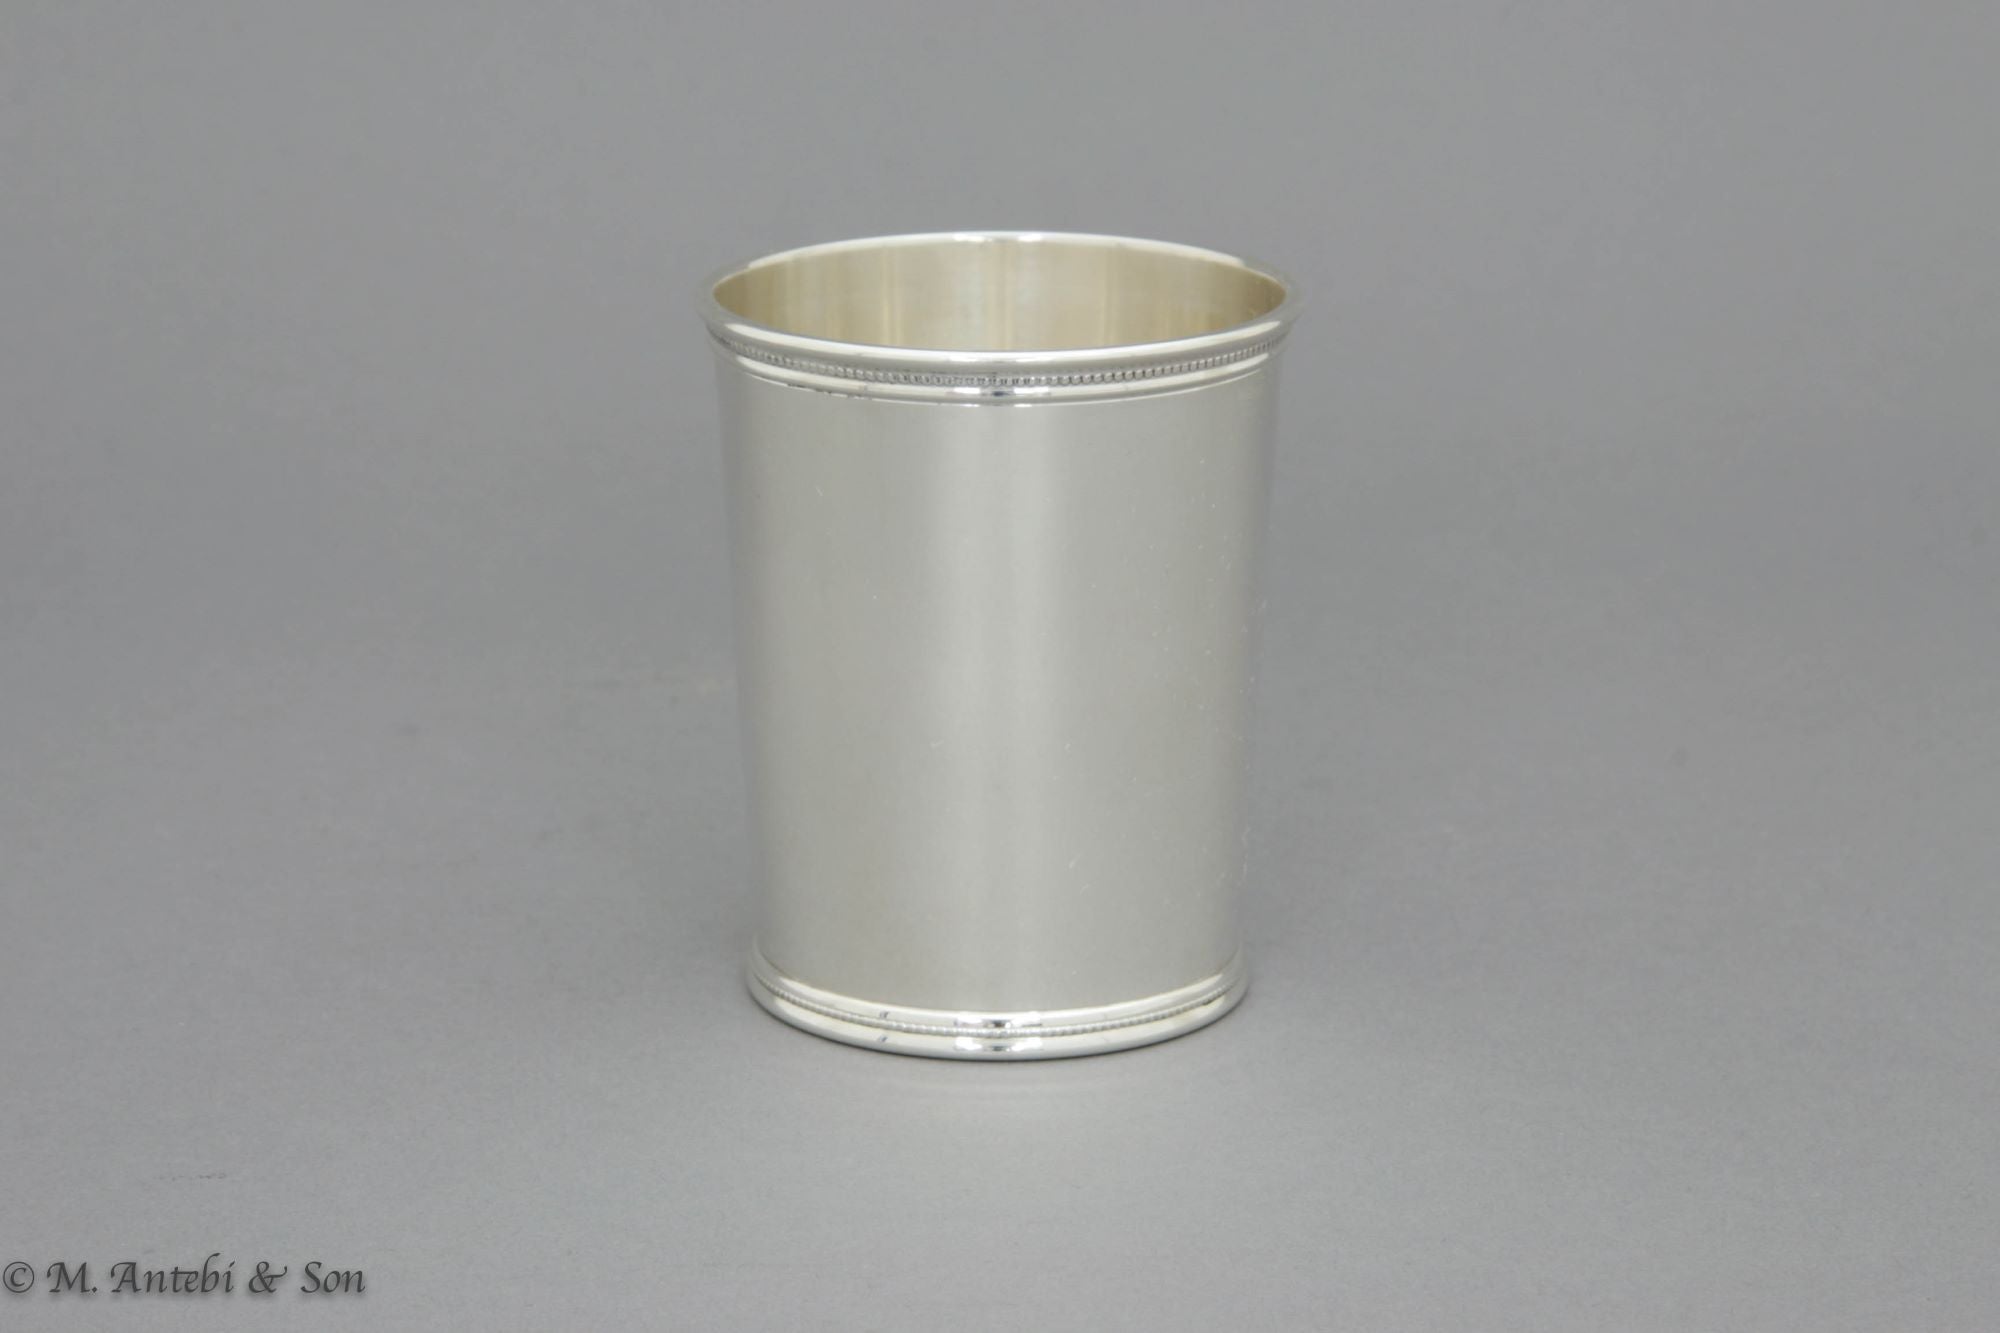 Sterling Silver Tall Mint Julep Cup - S.R. Blackinton